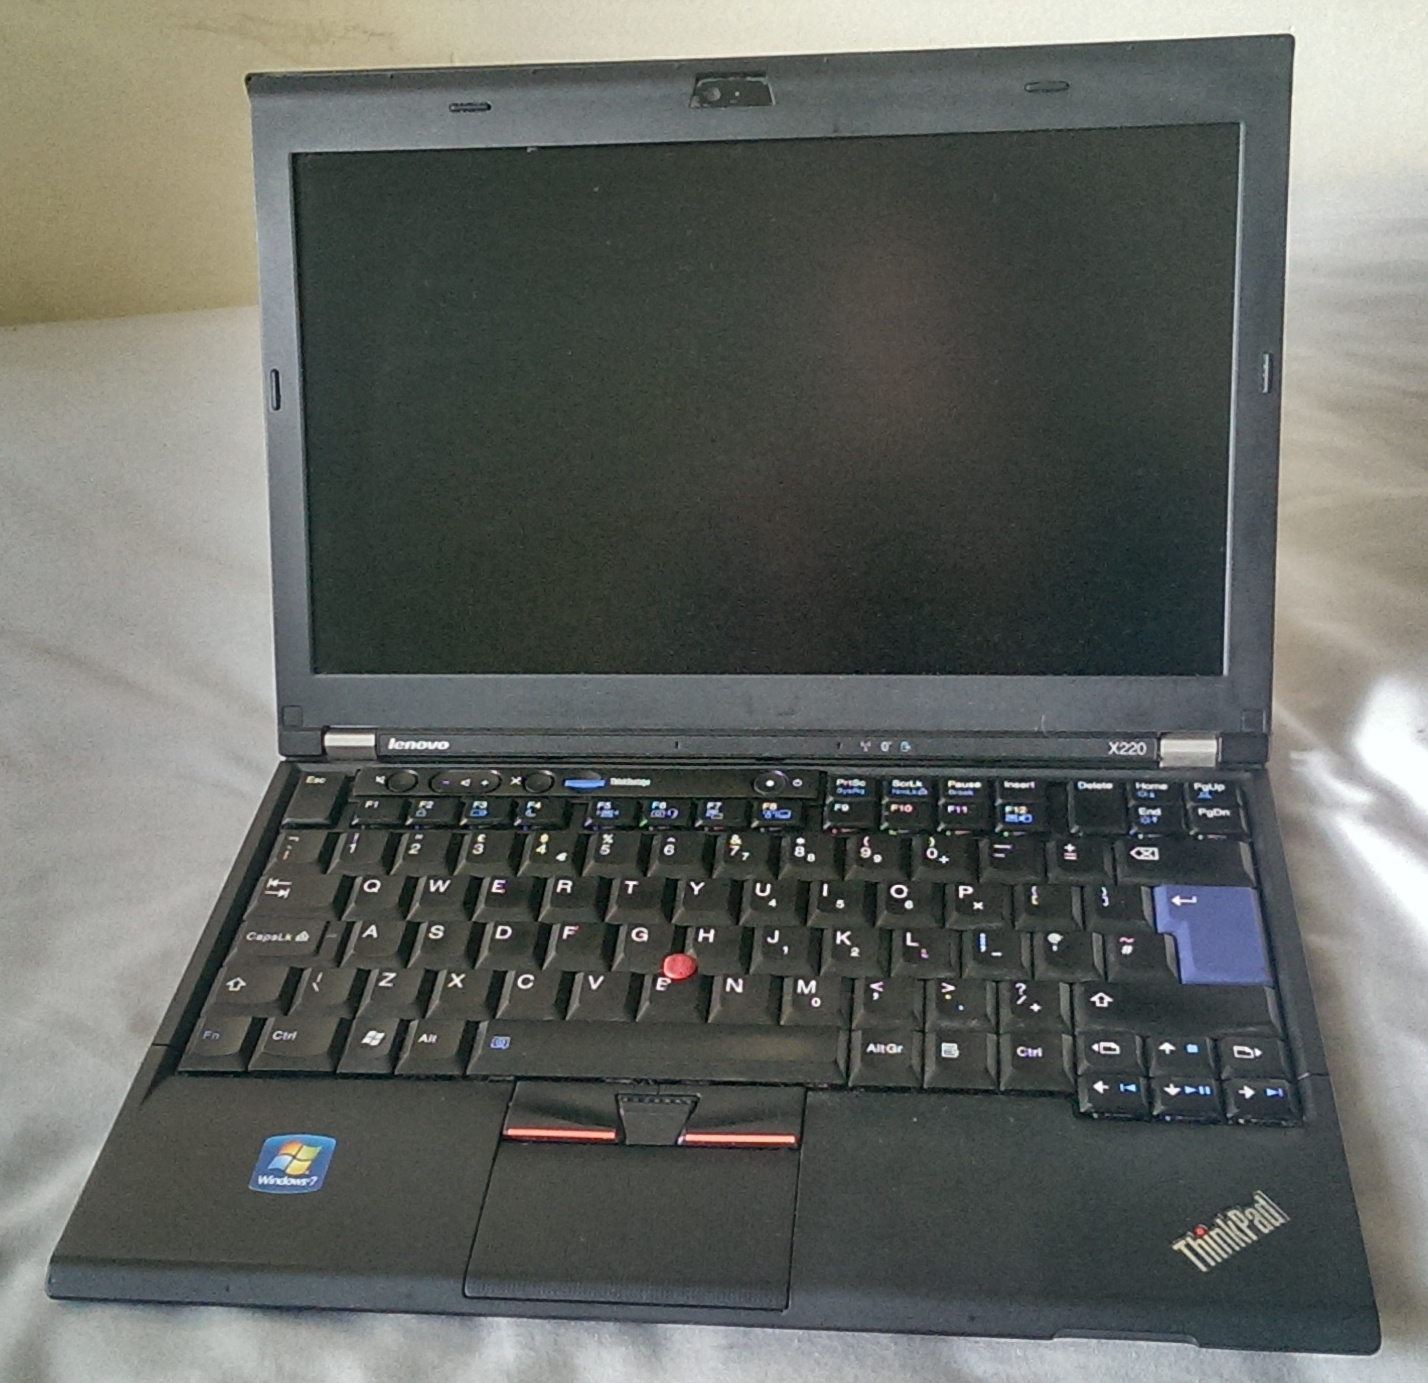 The ThinkPad as it arrived.